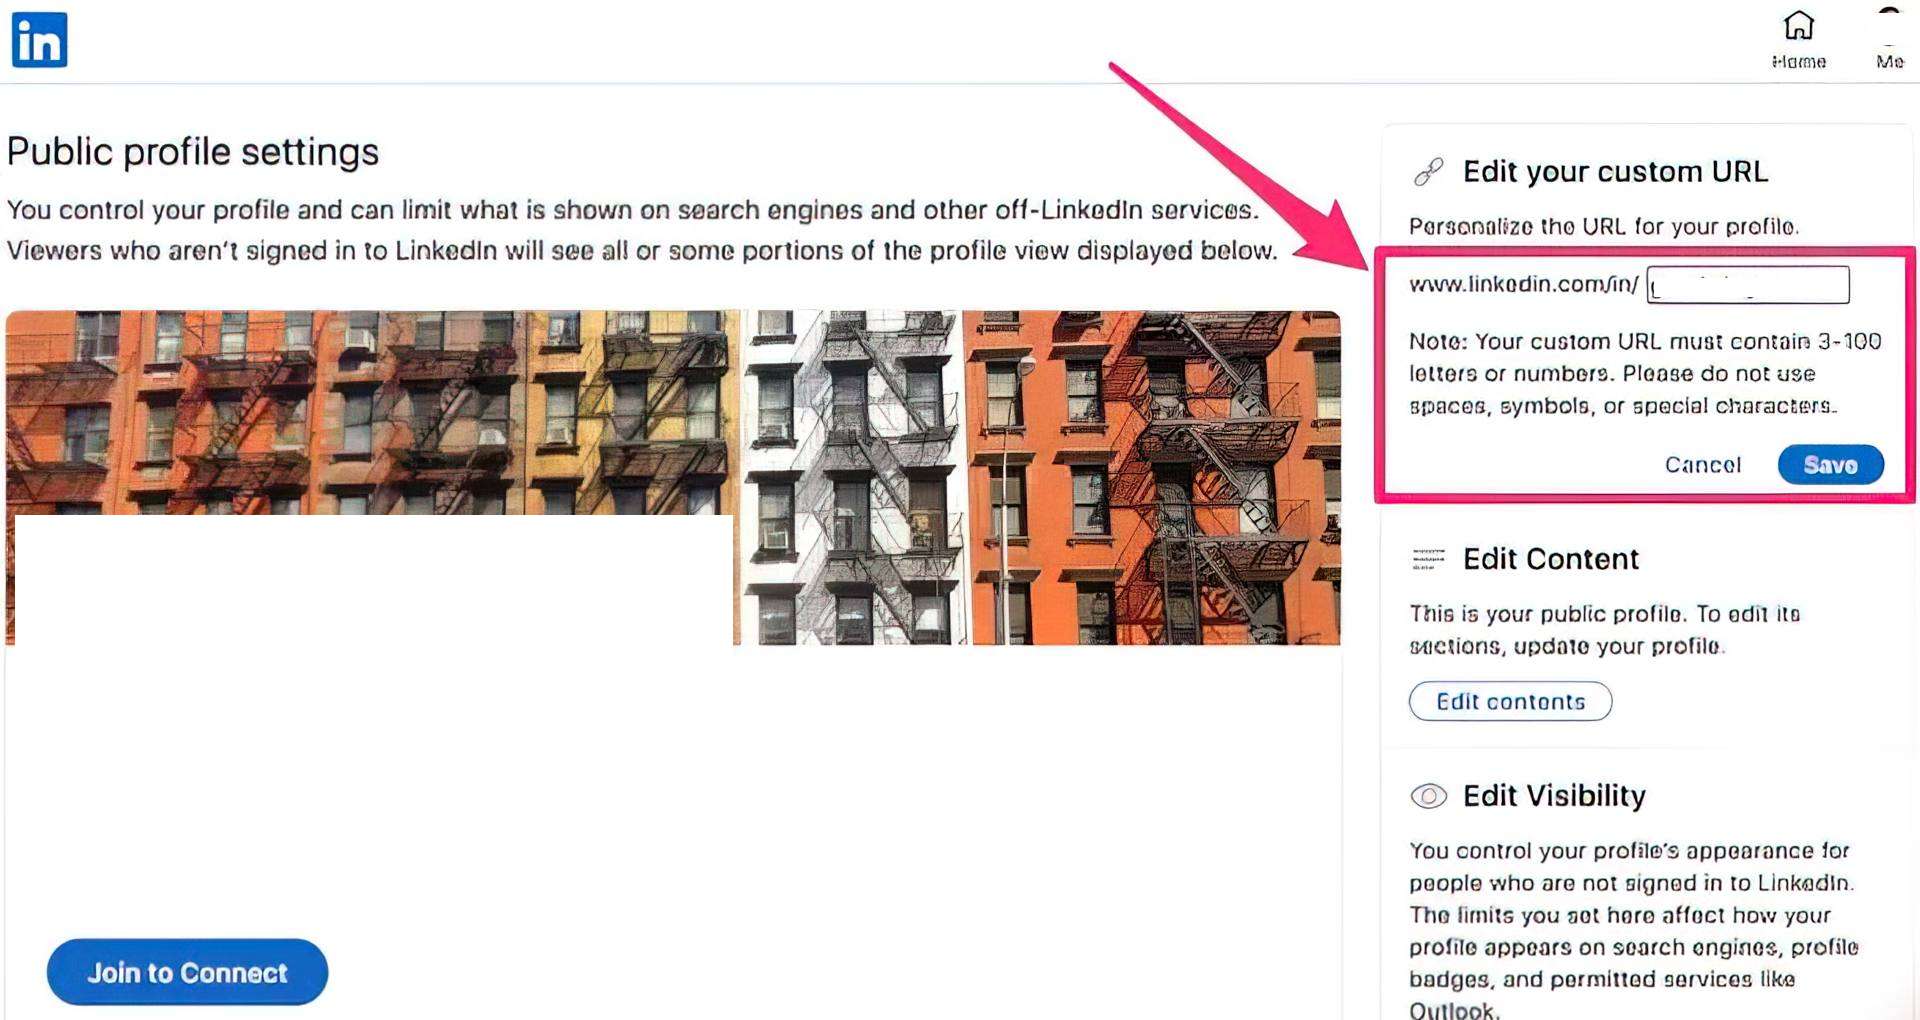 In this article we'll be going over "How to get LinkedIn profile URL" and change it to a custom one if you wish to do so.